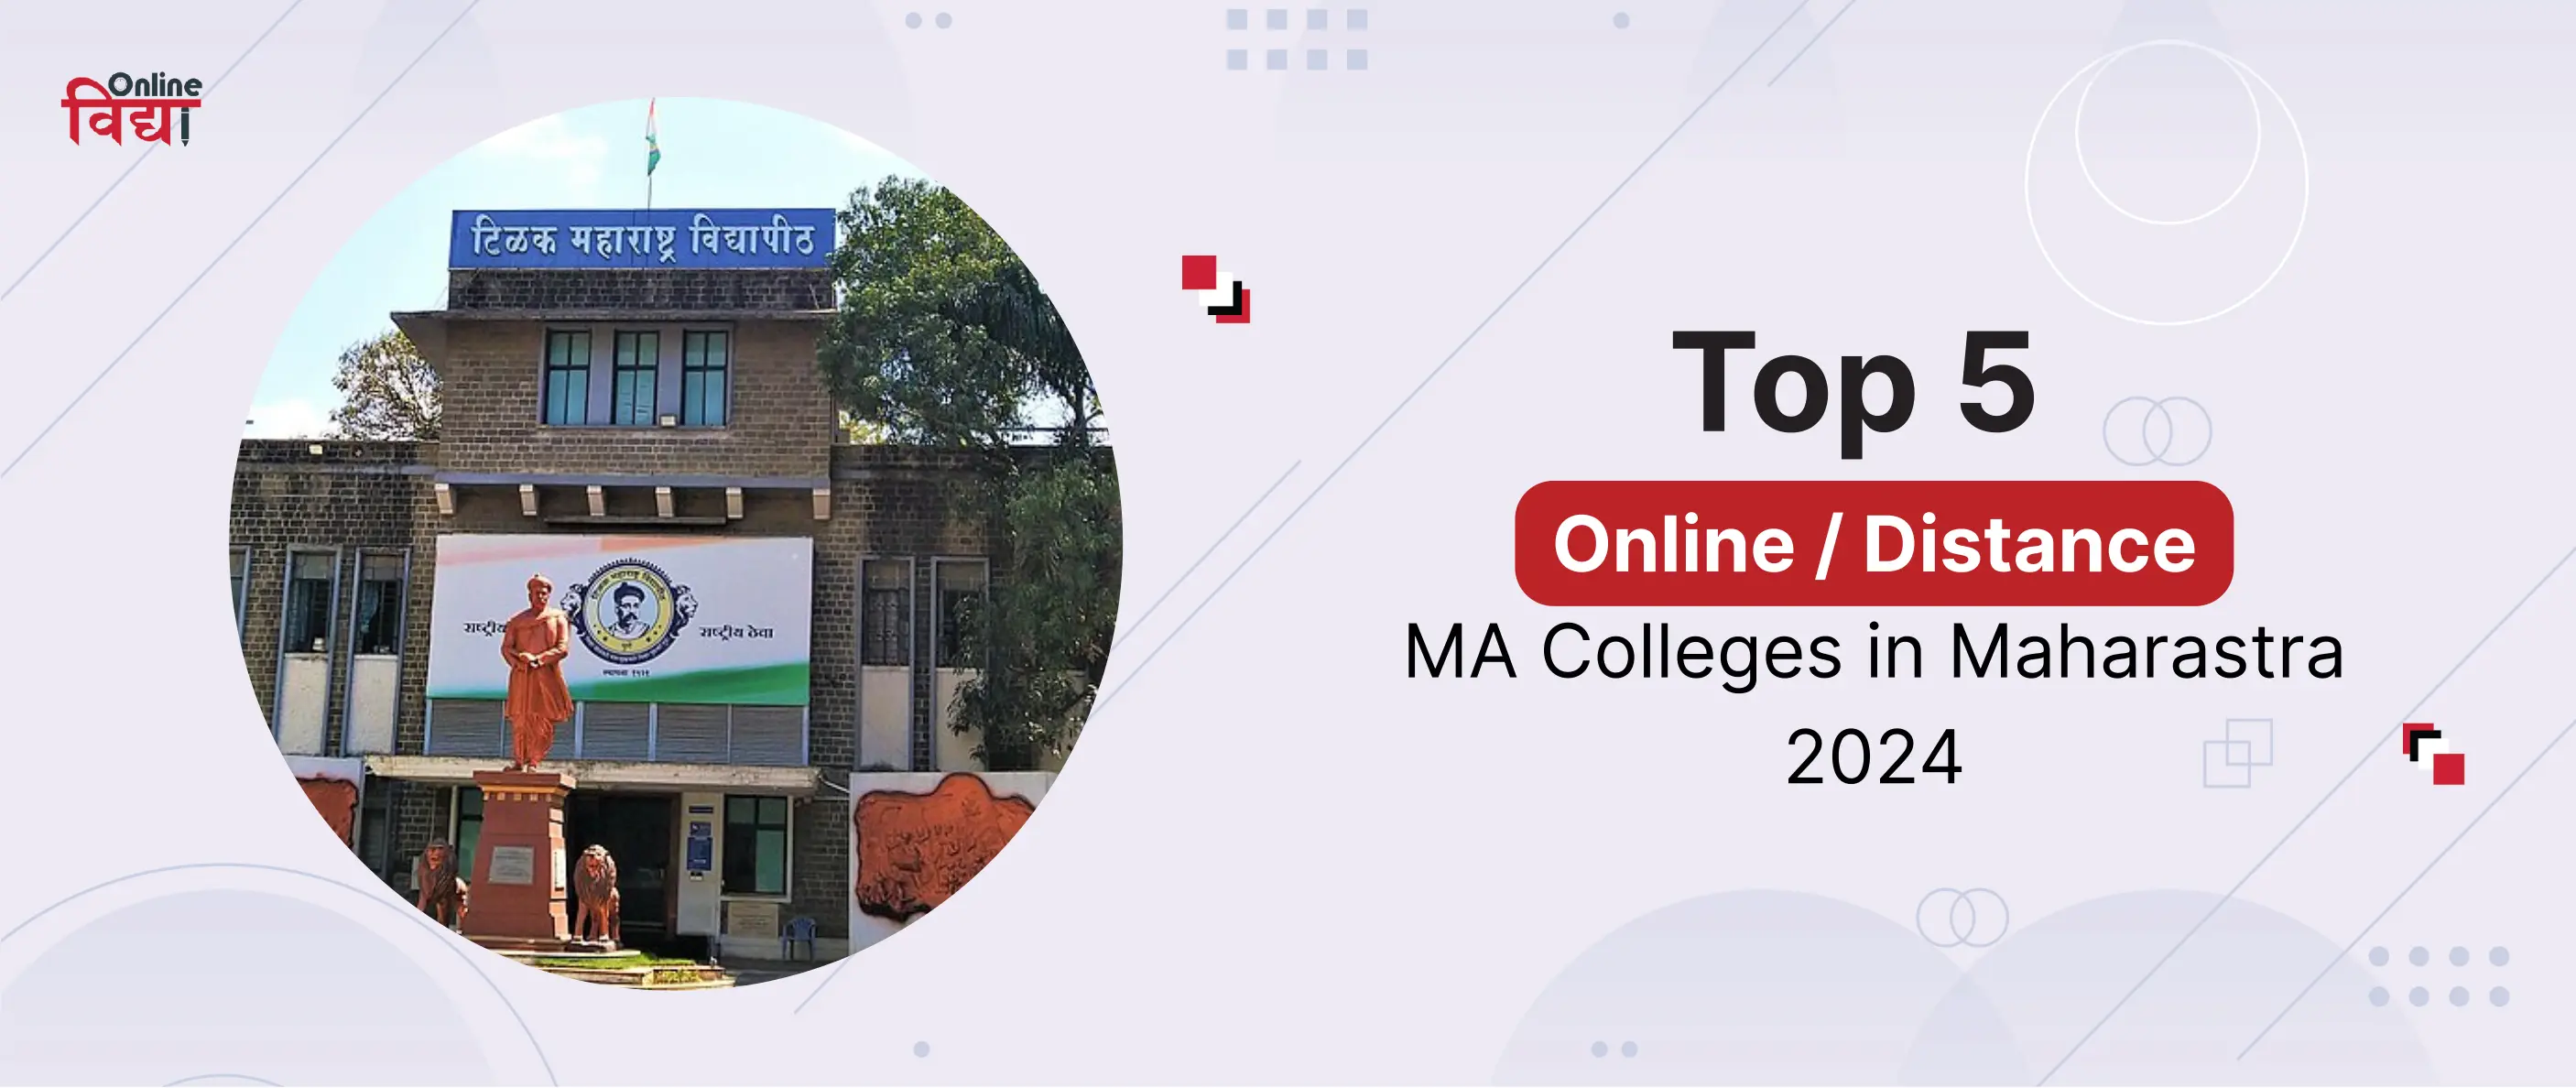 Top 5 Online/Distance MA Colleges in Maharastra 2024